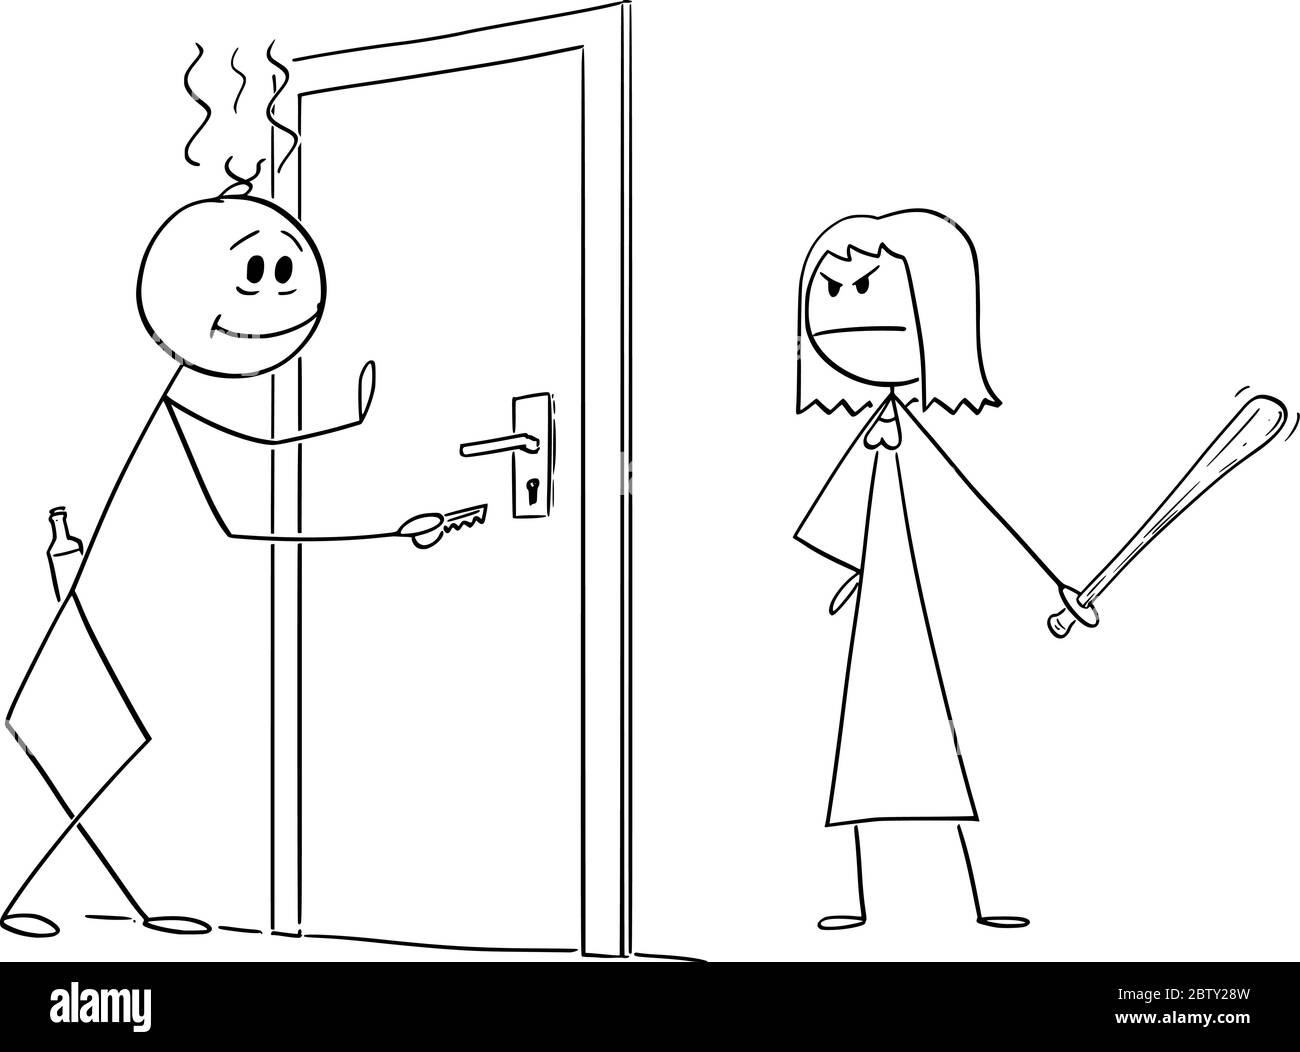 Vector cartoon stick figure drawing conceptual illustration of drunk man returning home. Angry wife is waiting for him. Concept of alcoholism. Stock Vector